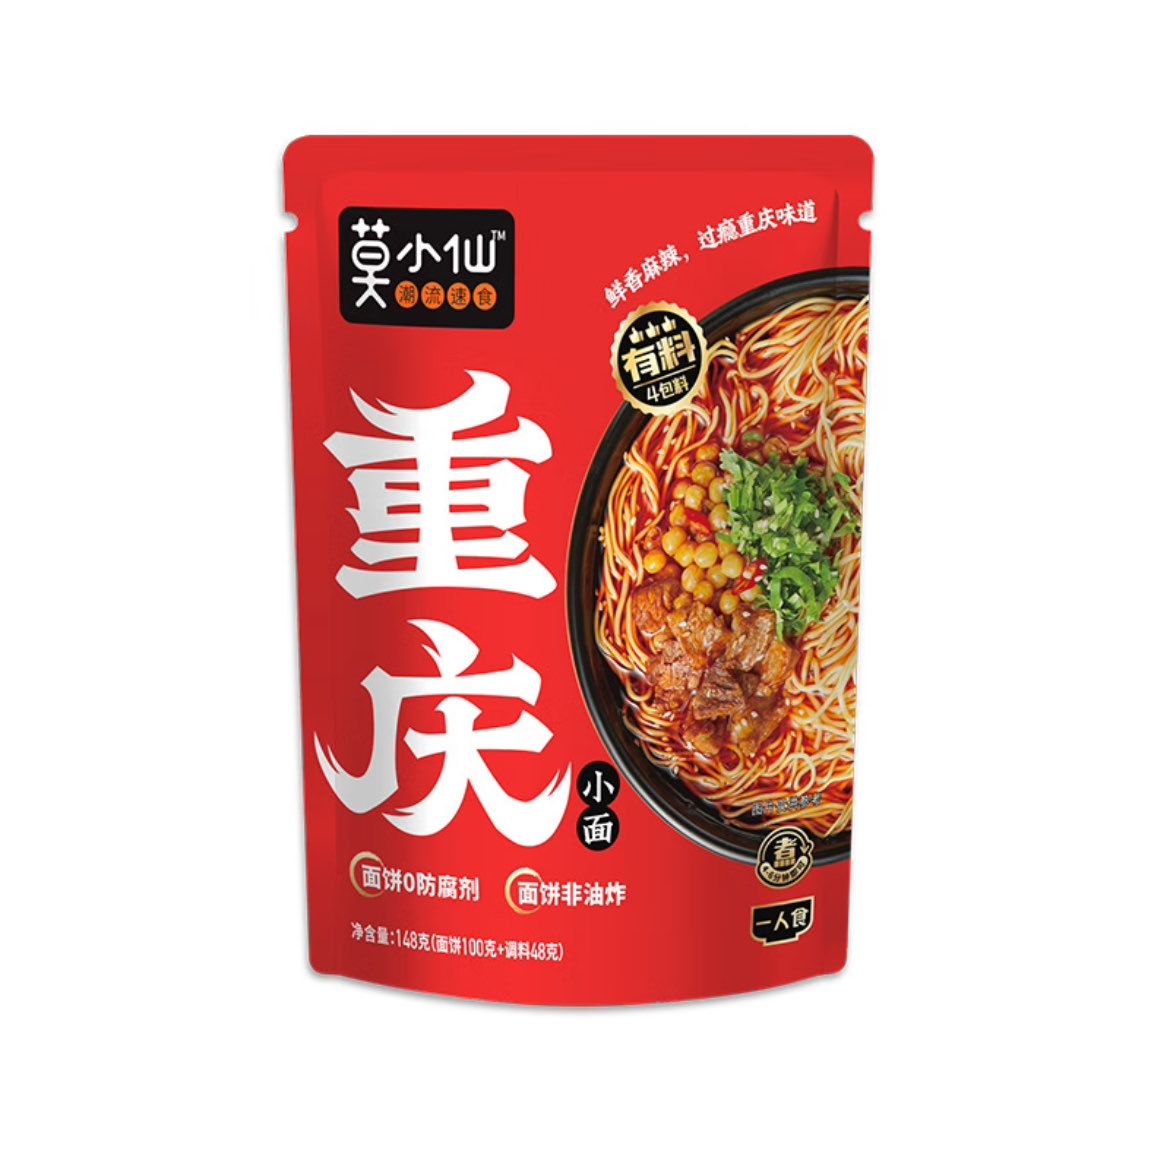 Chongqing Noodles Spicy Noodles China's best-selling fashionable fast food 148g/bag for one person